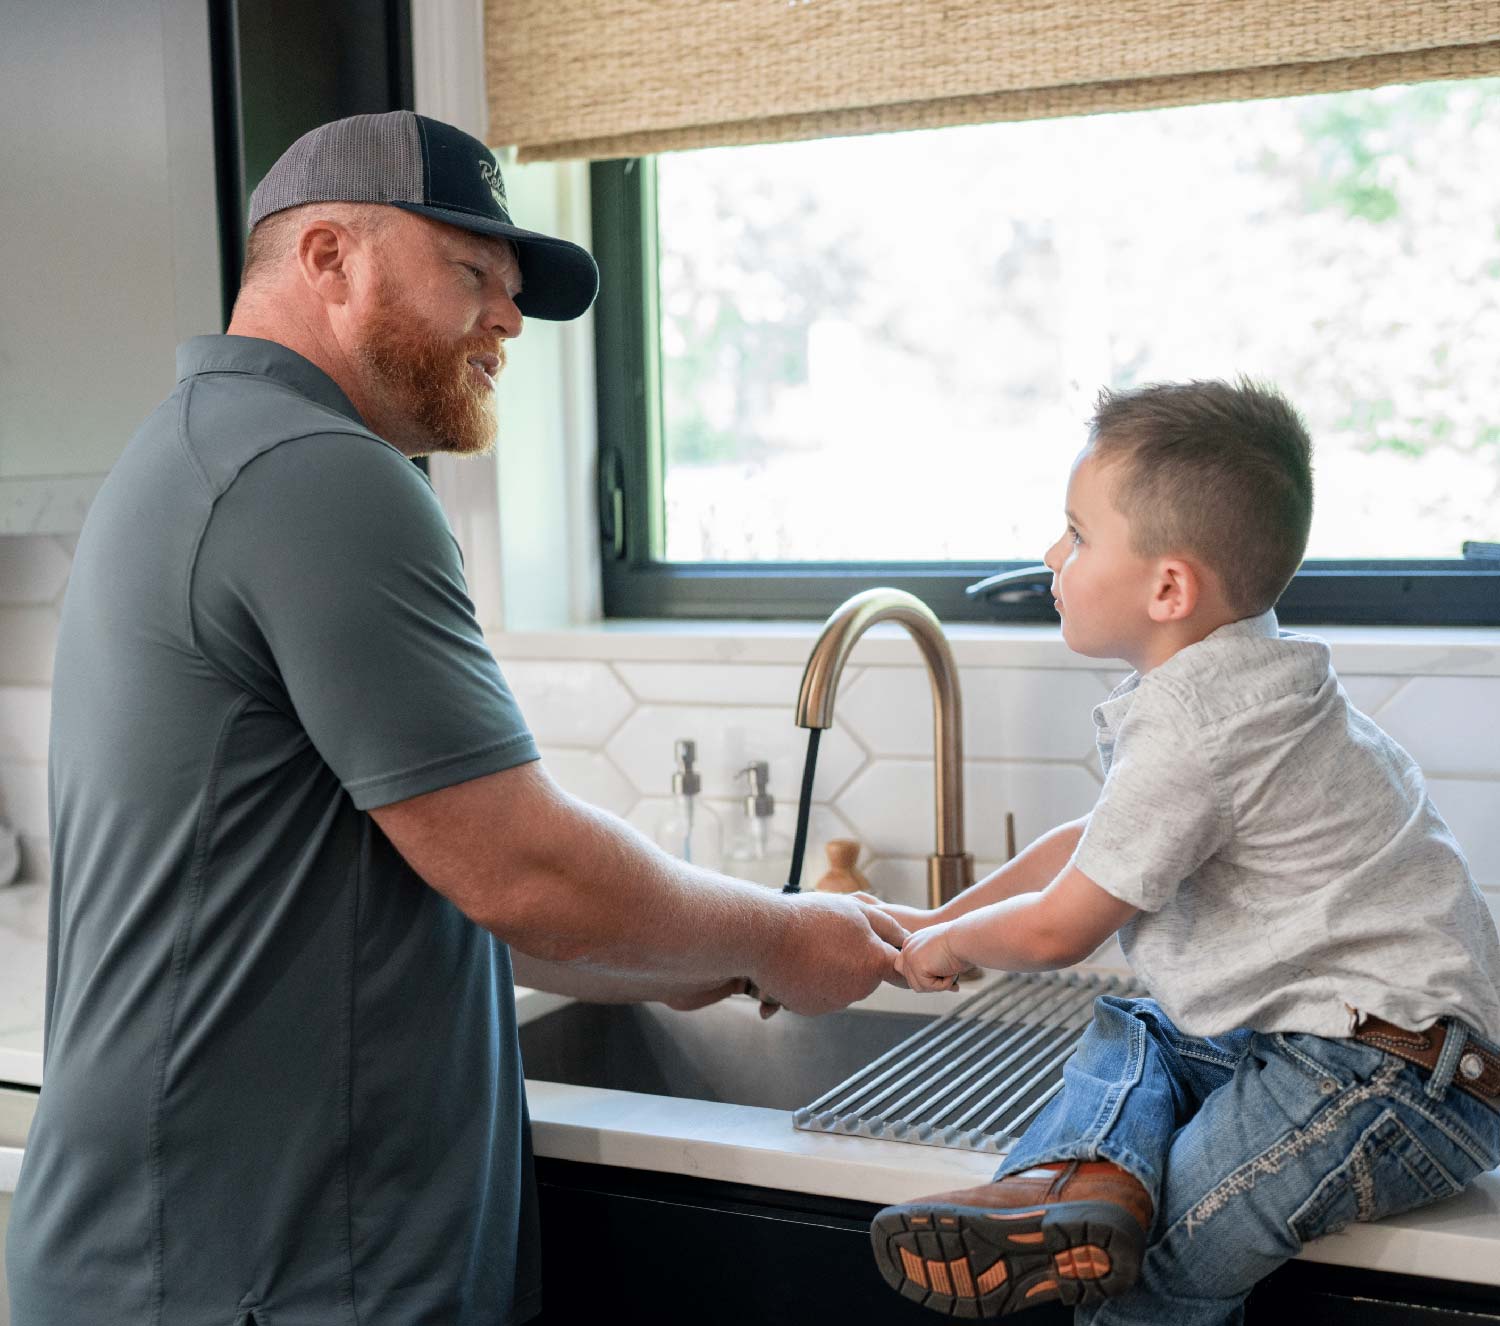 plumber in a residential home interacting with young son sitting at the sink learning about plumbing fictures